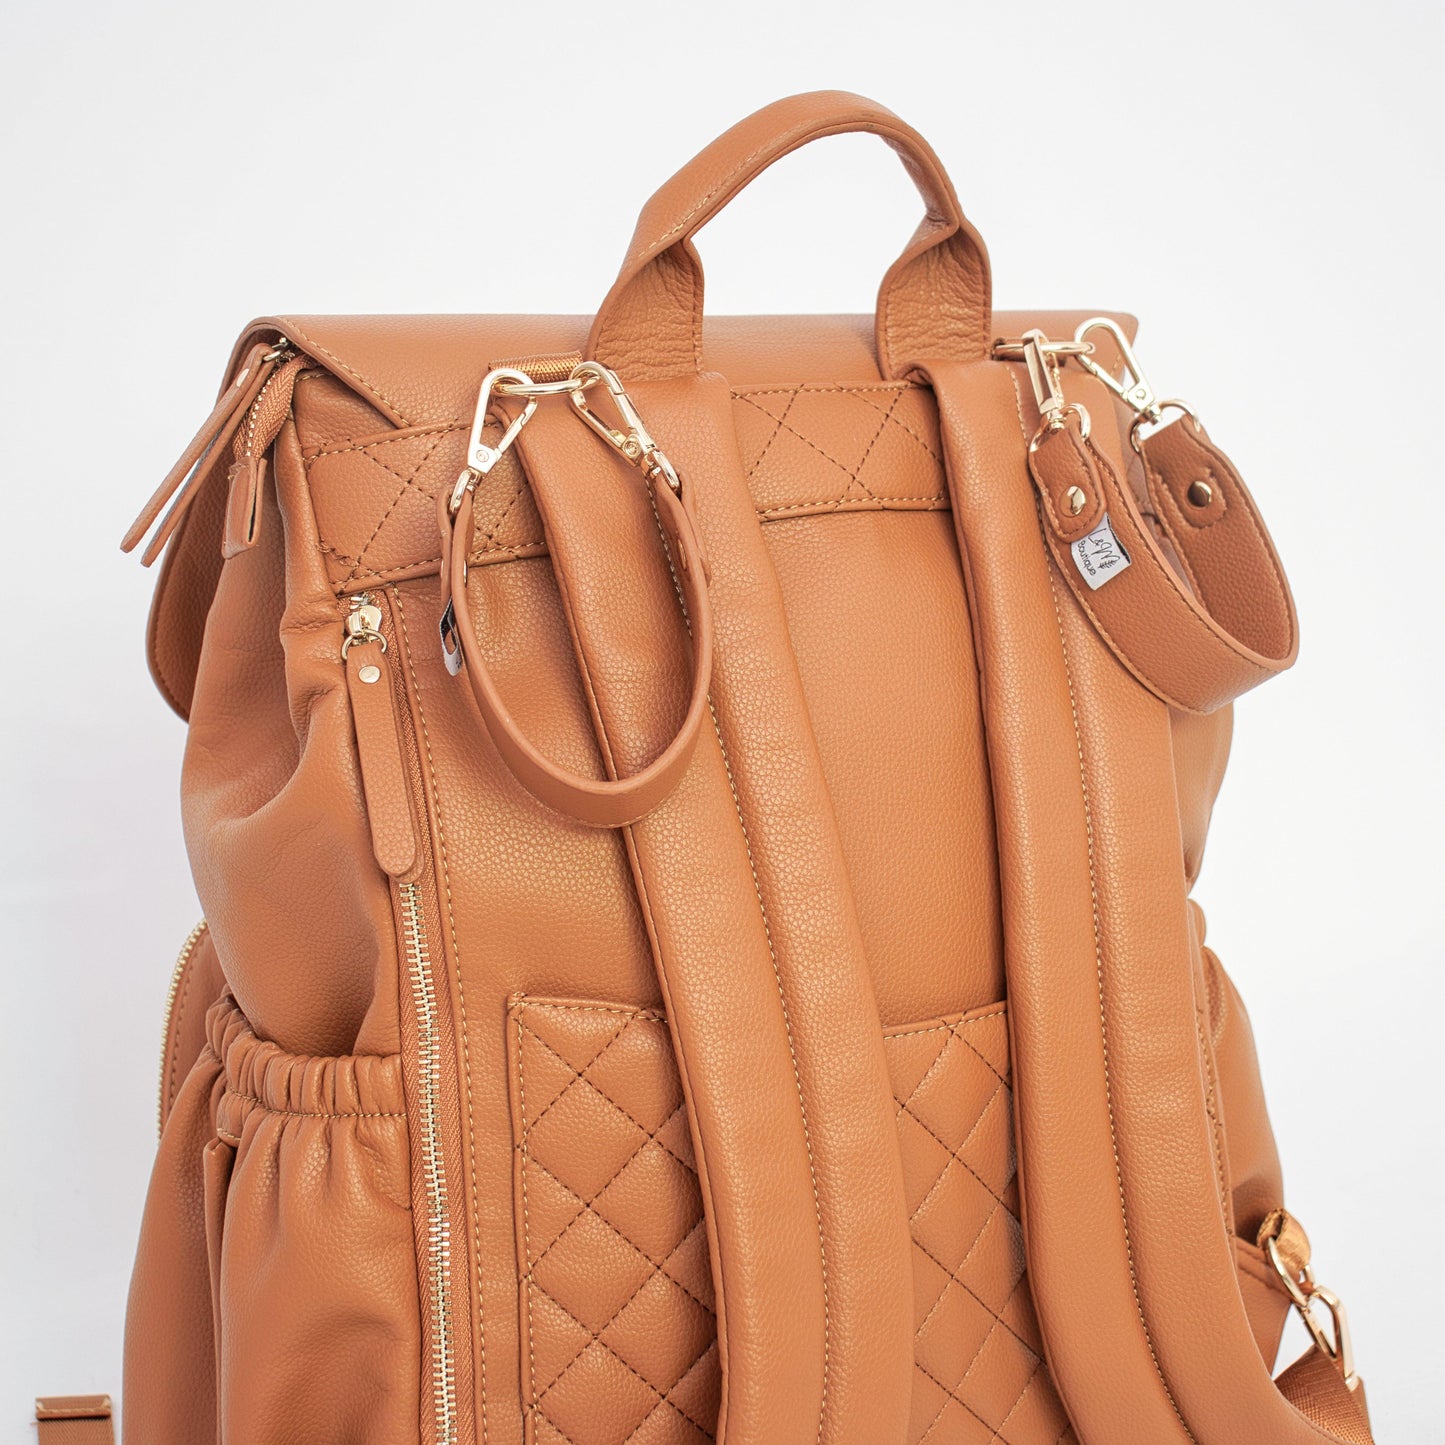 Milana Nappy Bag in Tan by L&M Boutique Australia with pram straps for stroller attachment